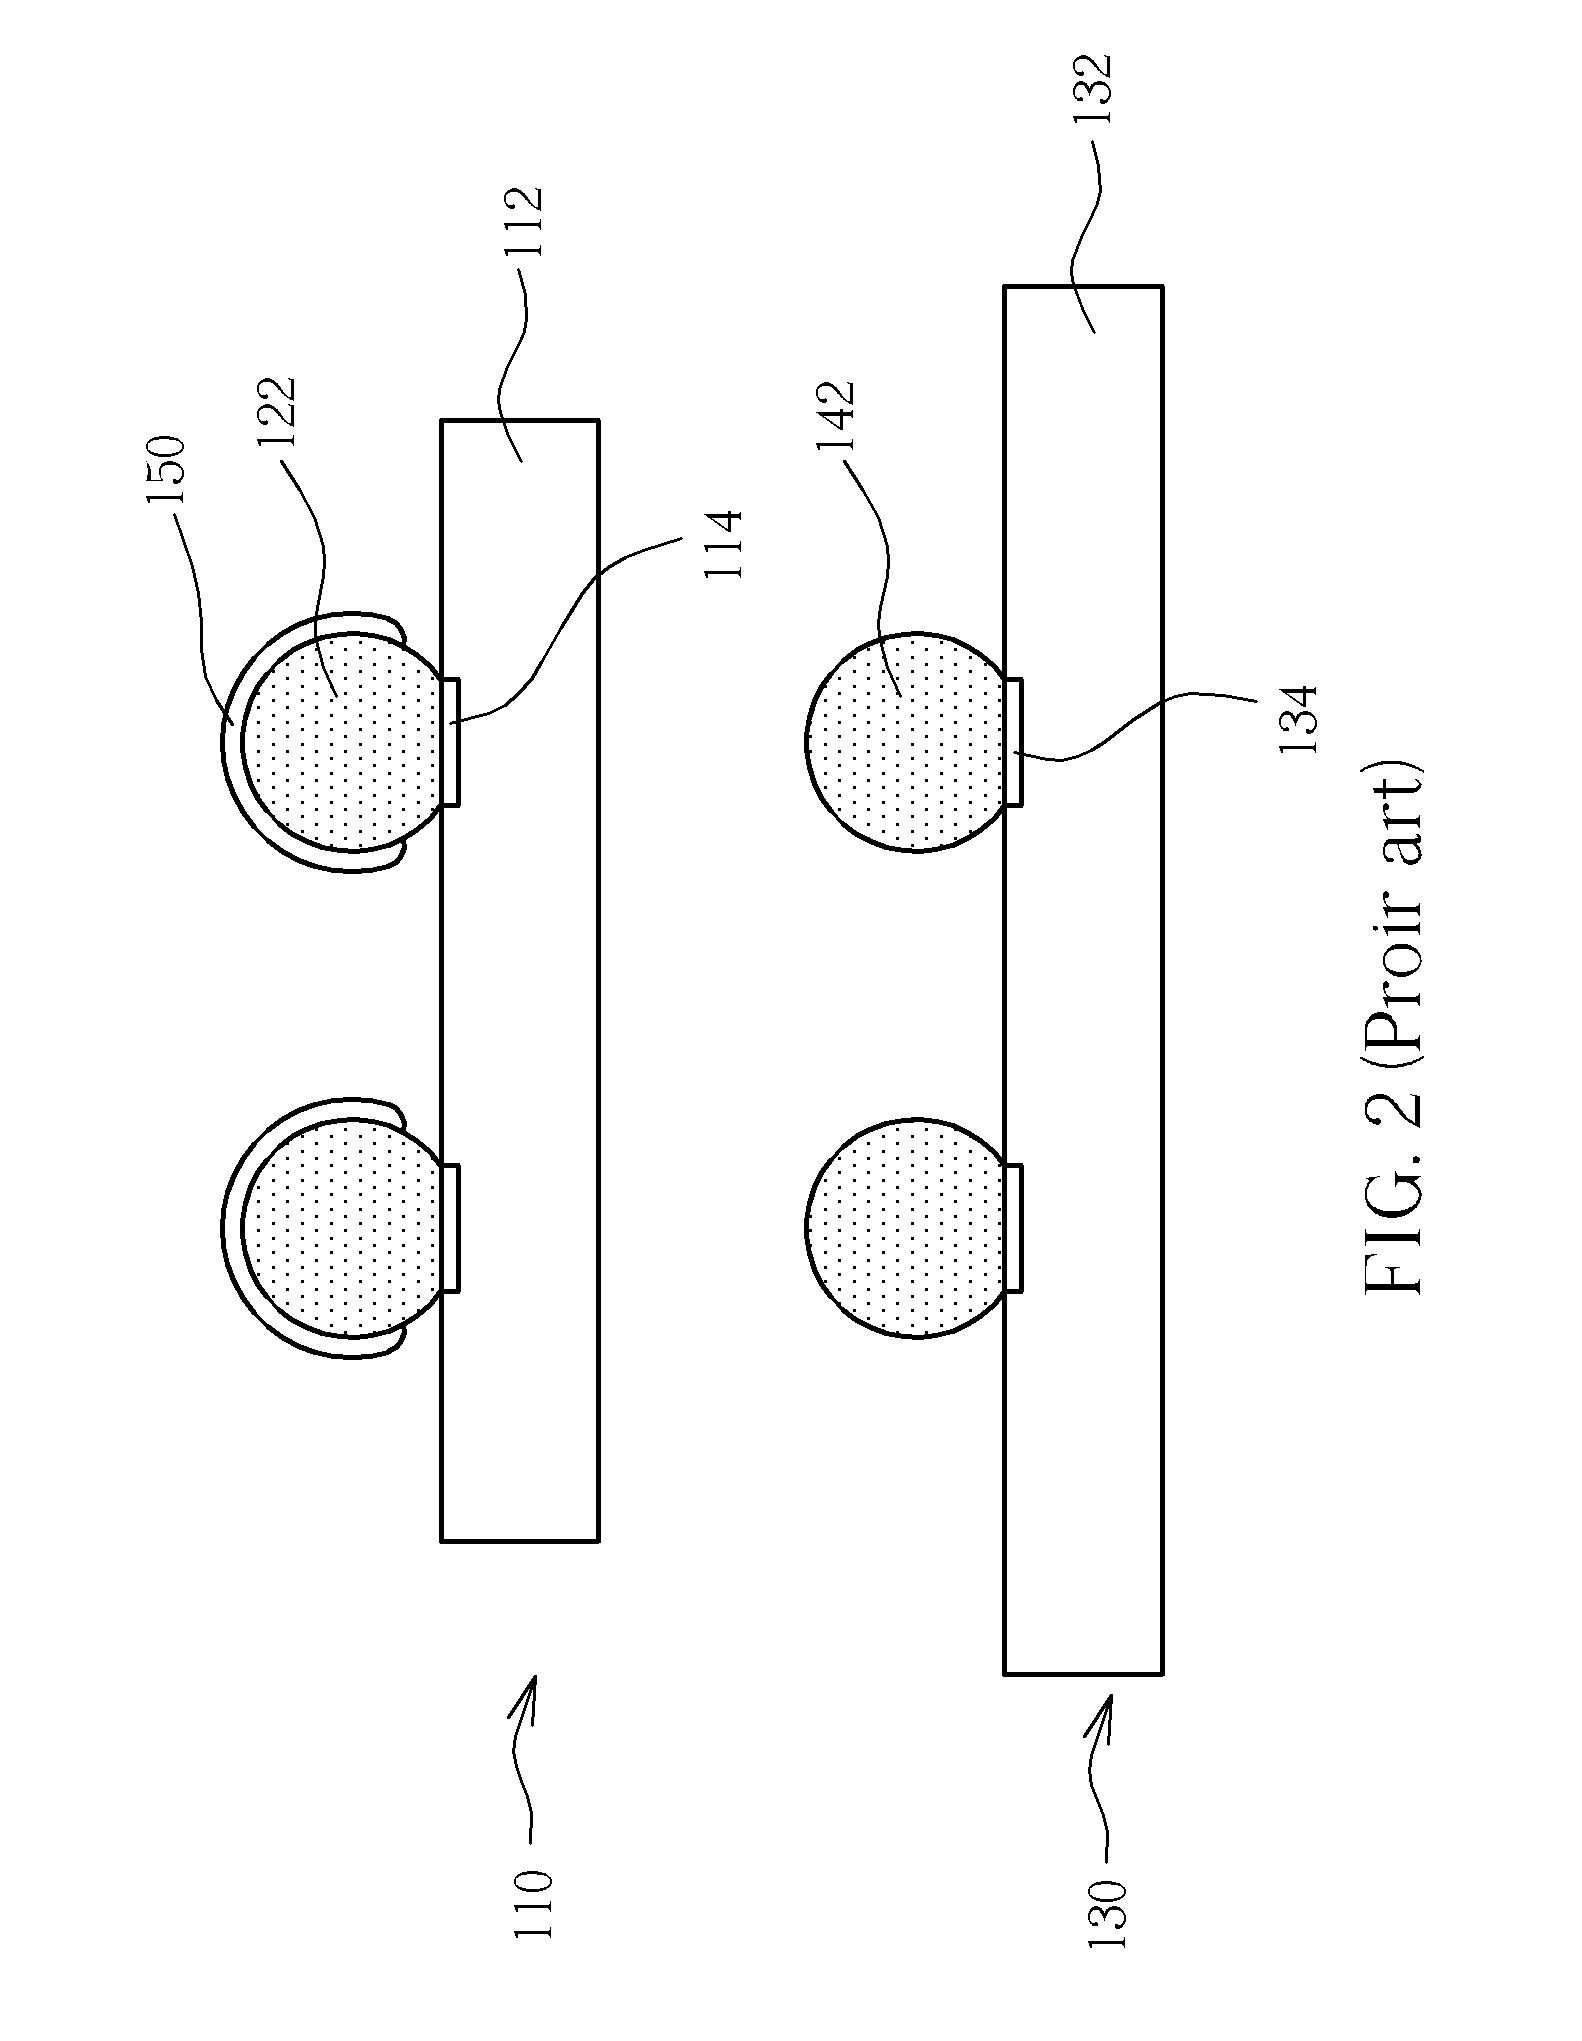 Multi-chip structure and method of assembling chips